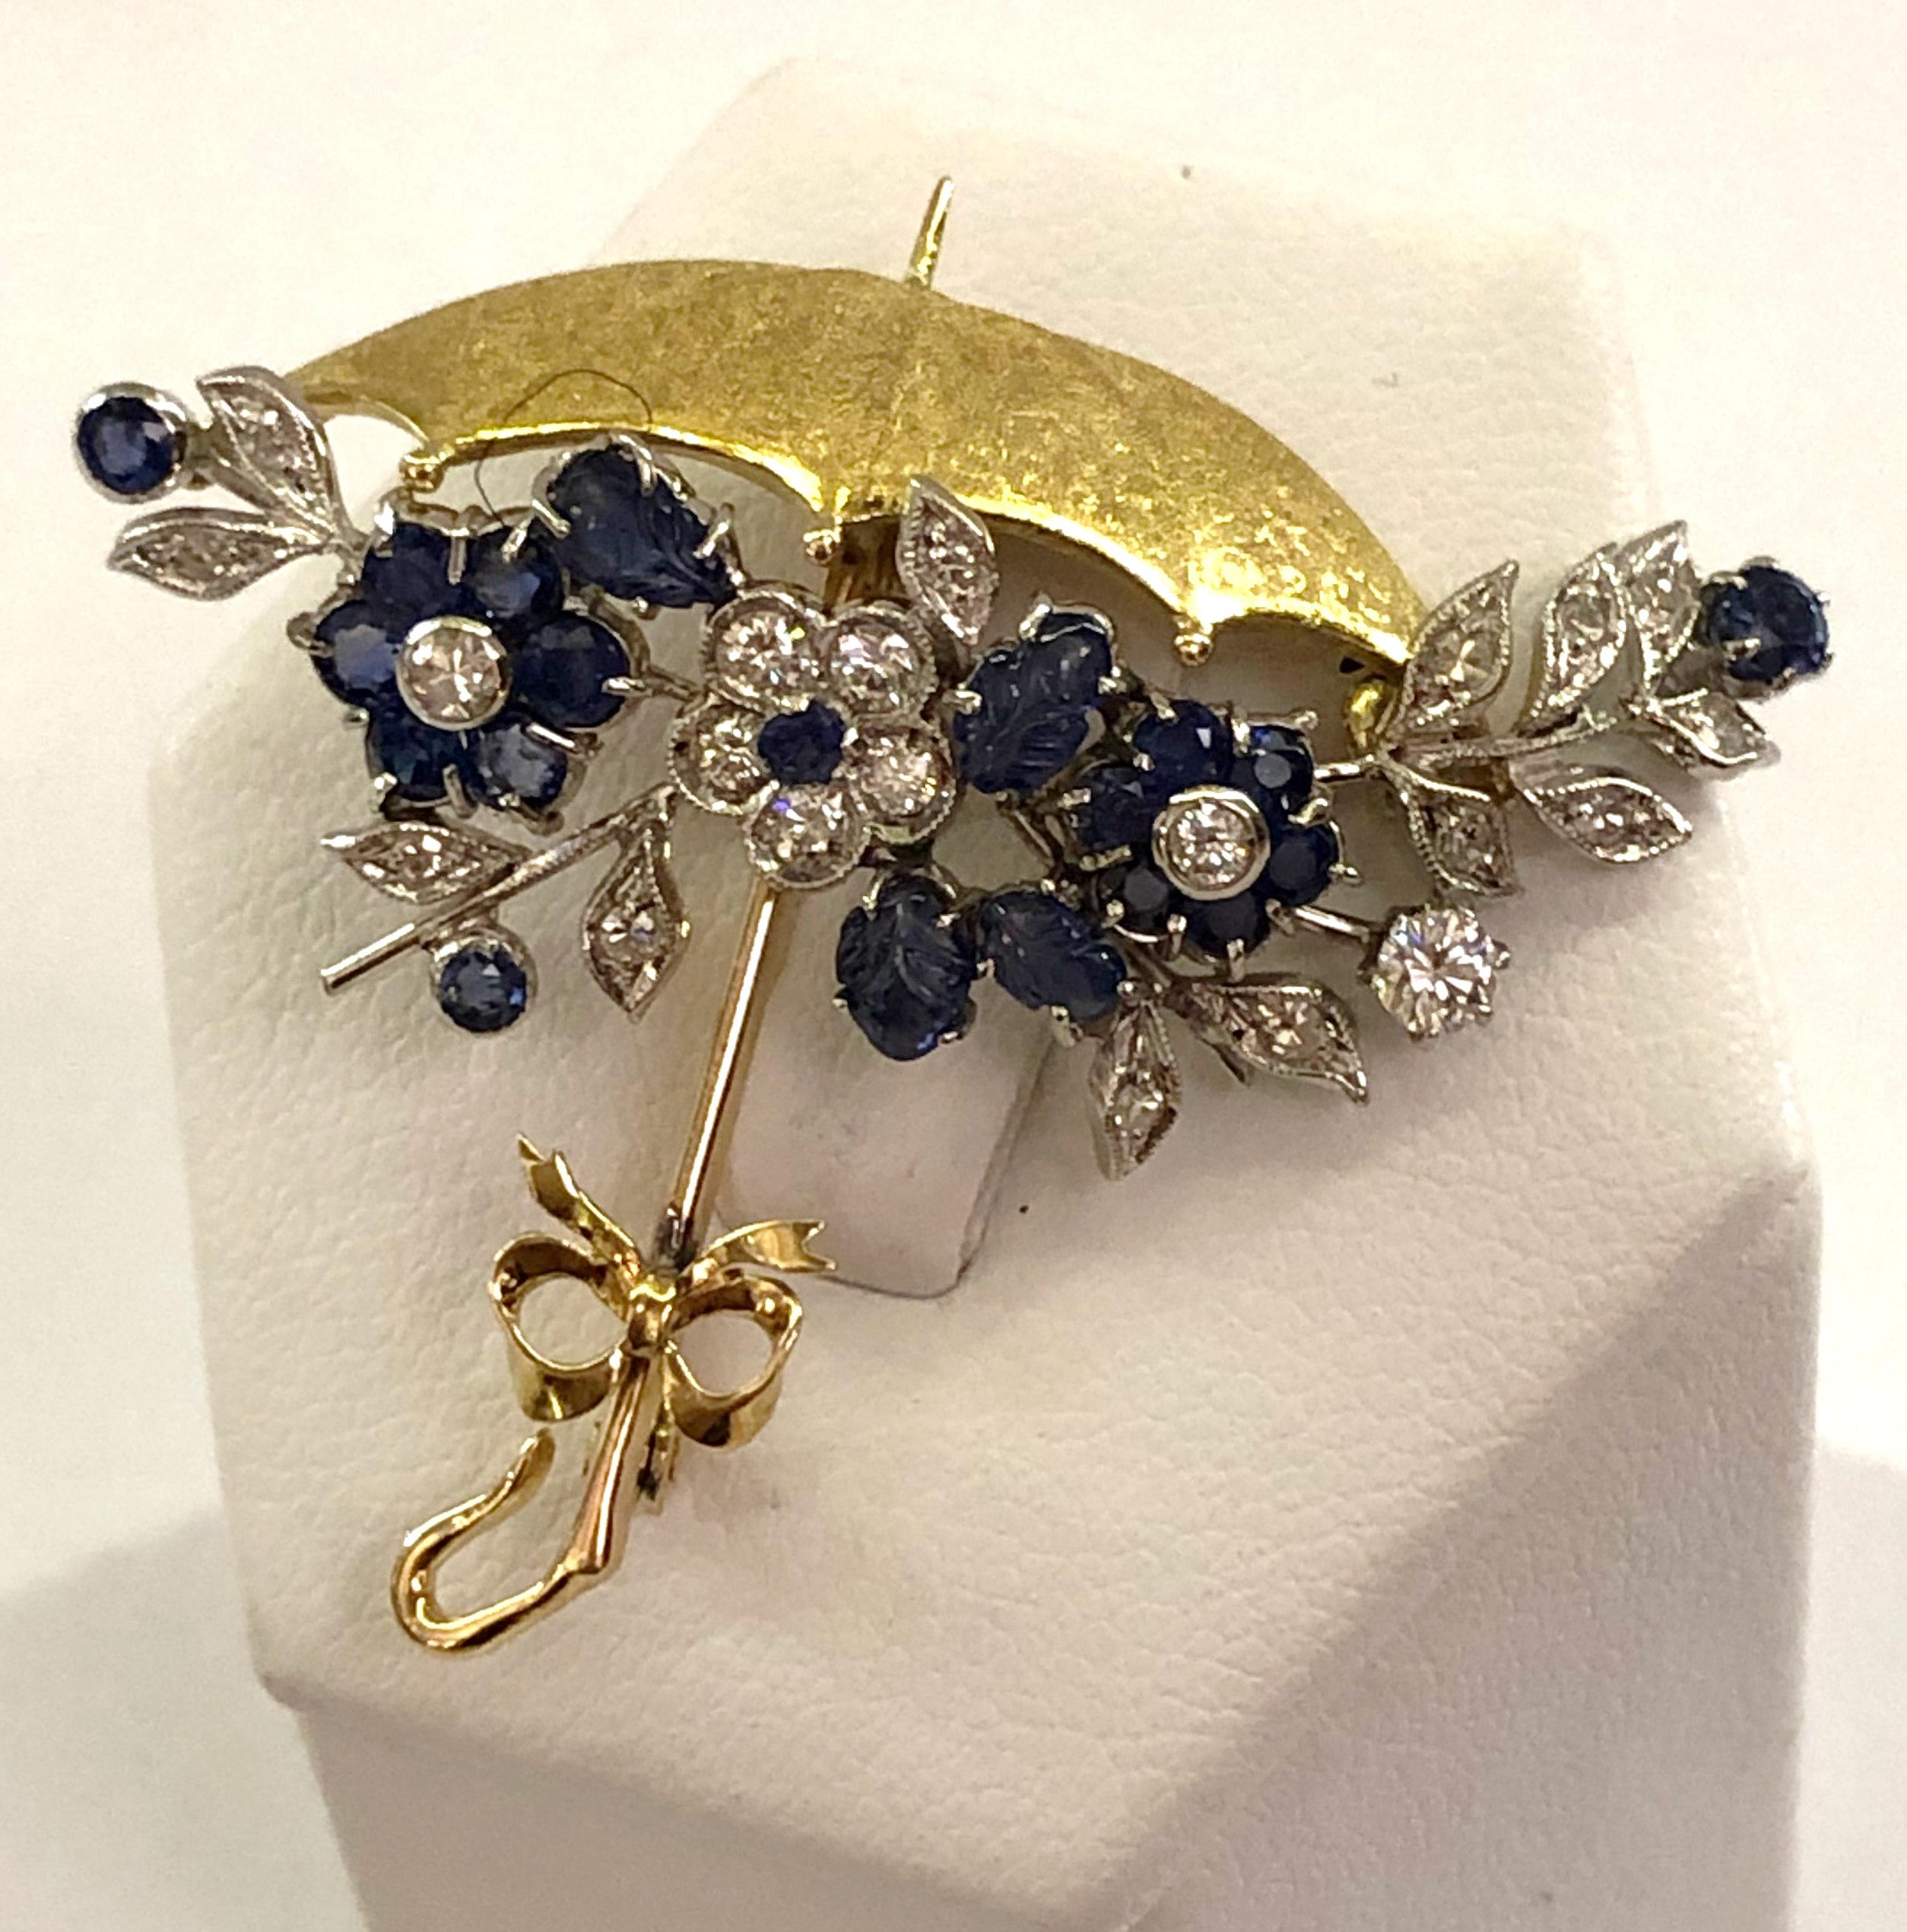 Vintage umbrella brooch with 18 karat yellow and white gold, with sapphires and brilliant diamonds, Italy 1950s 
Length 3.6cm